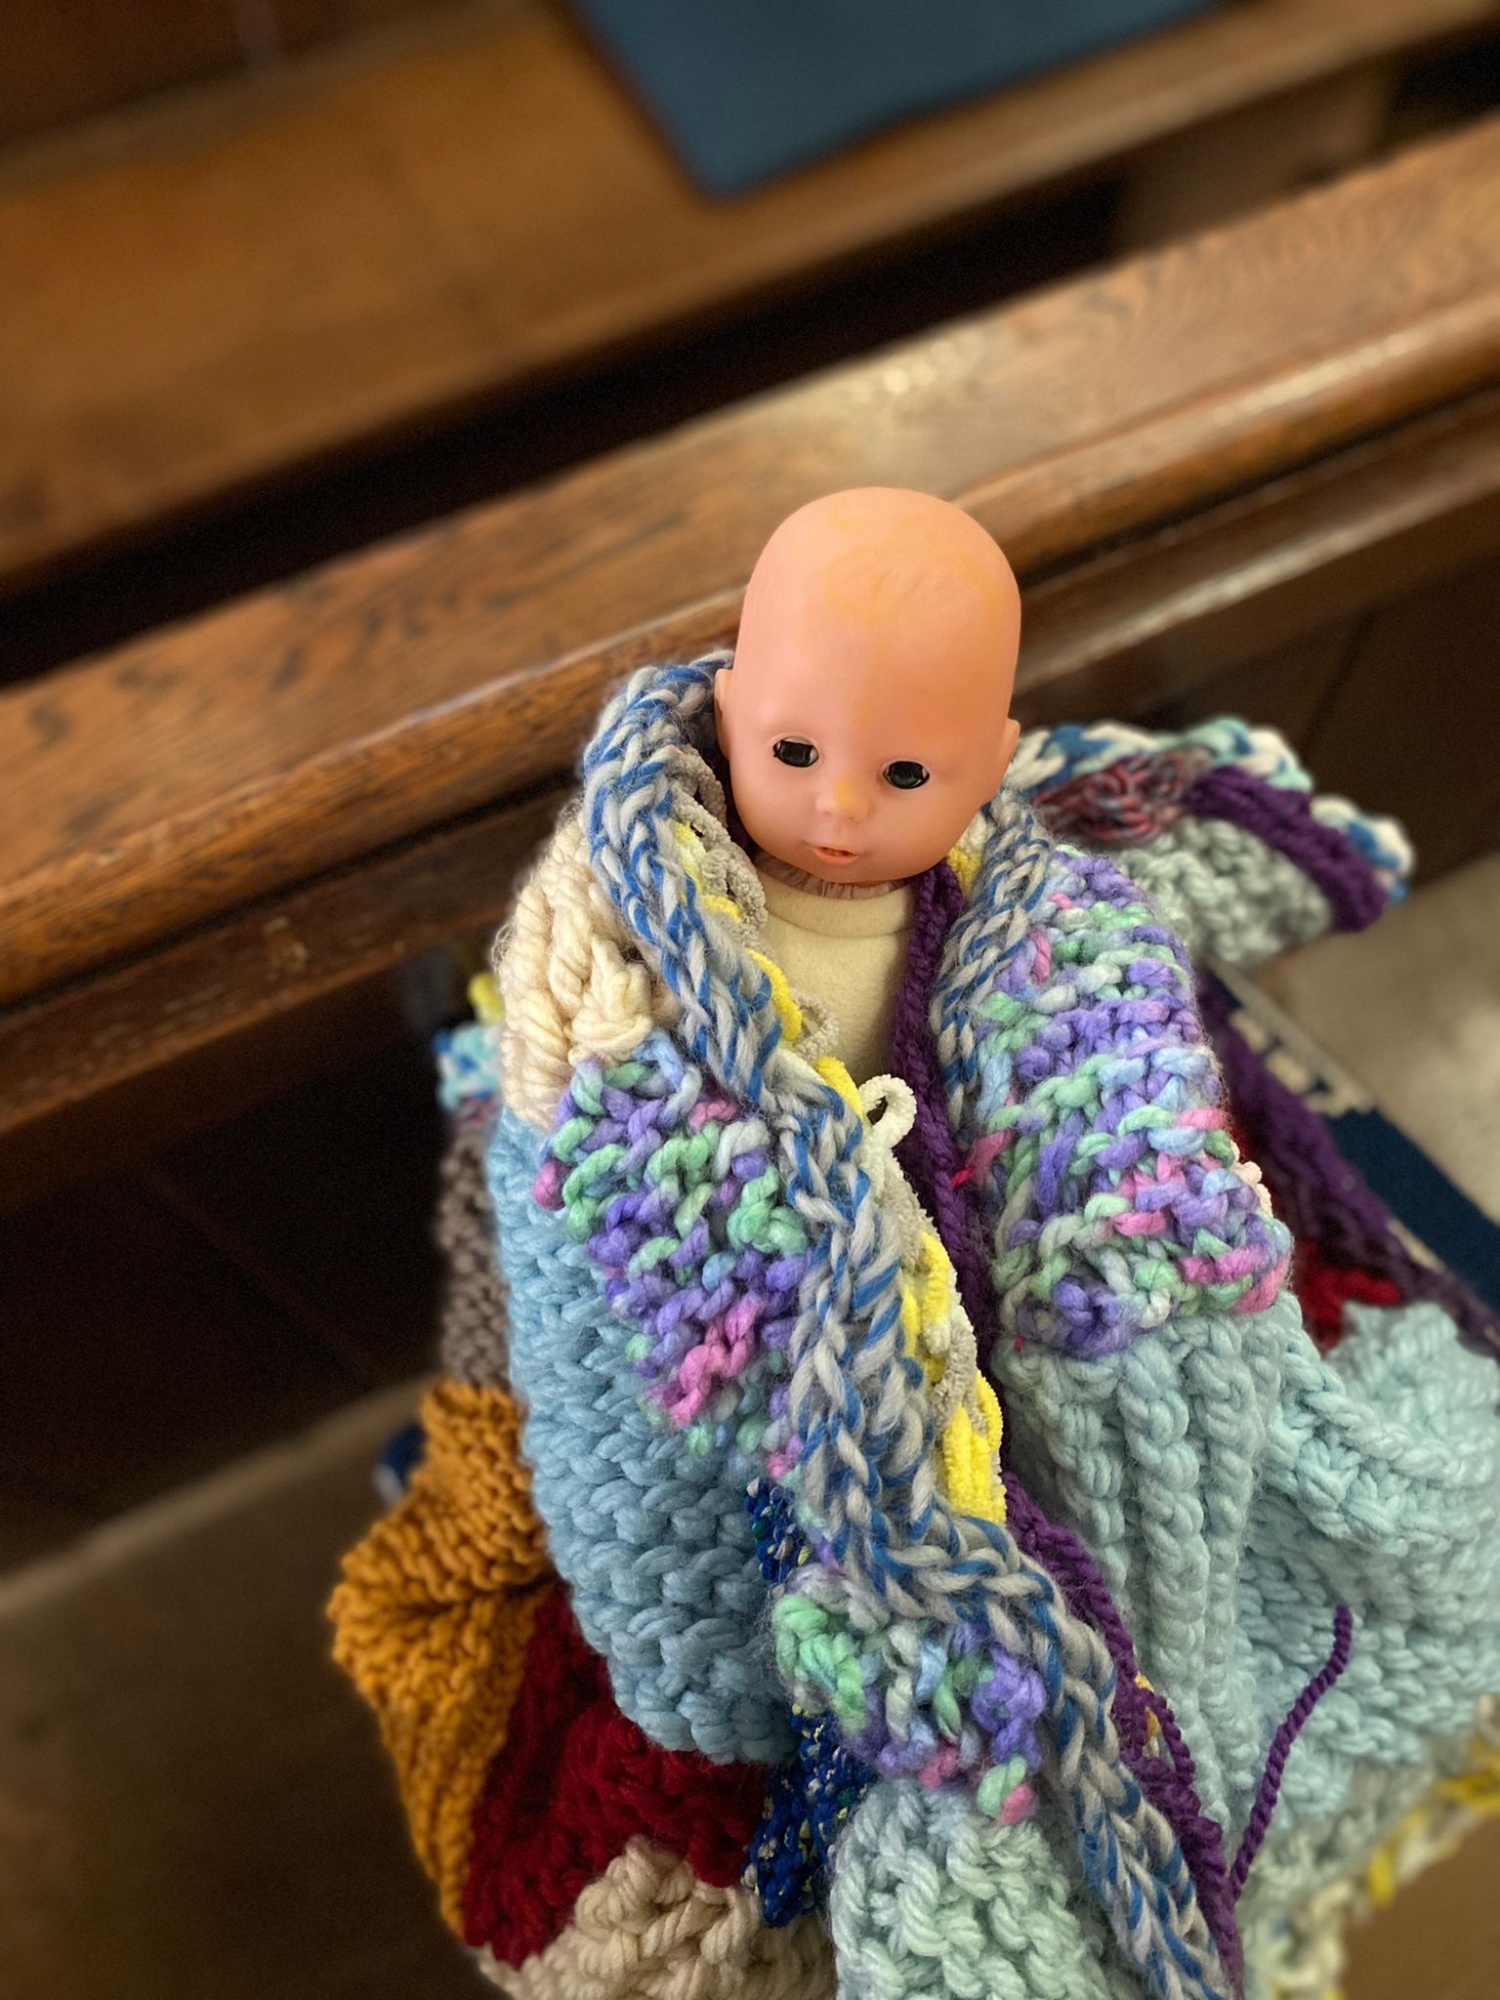 Baby Jesus in knitted blanket